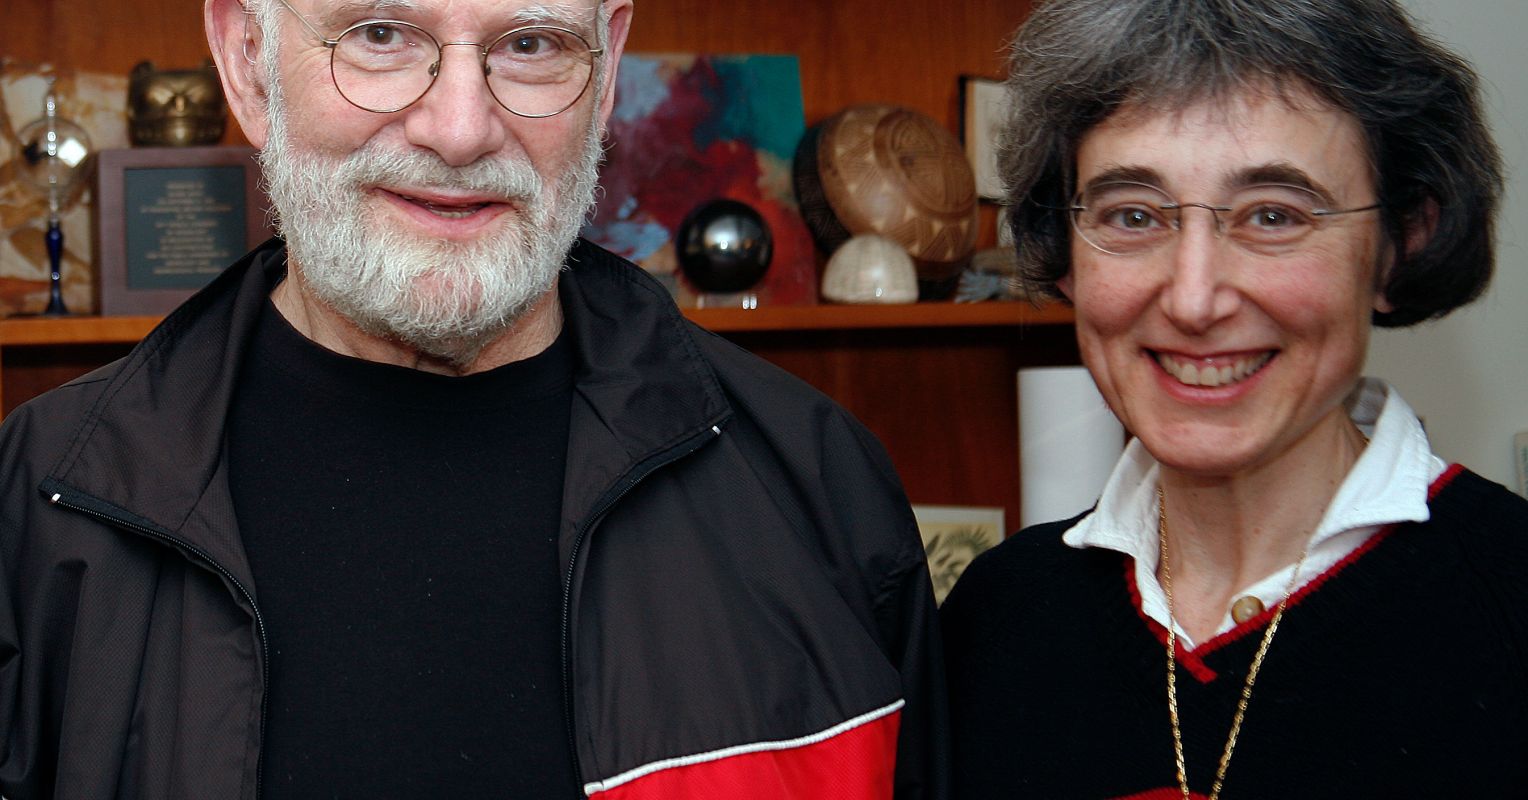 Susan Barry: Oliver Sacks taught me to see.